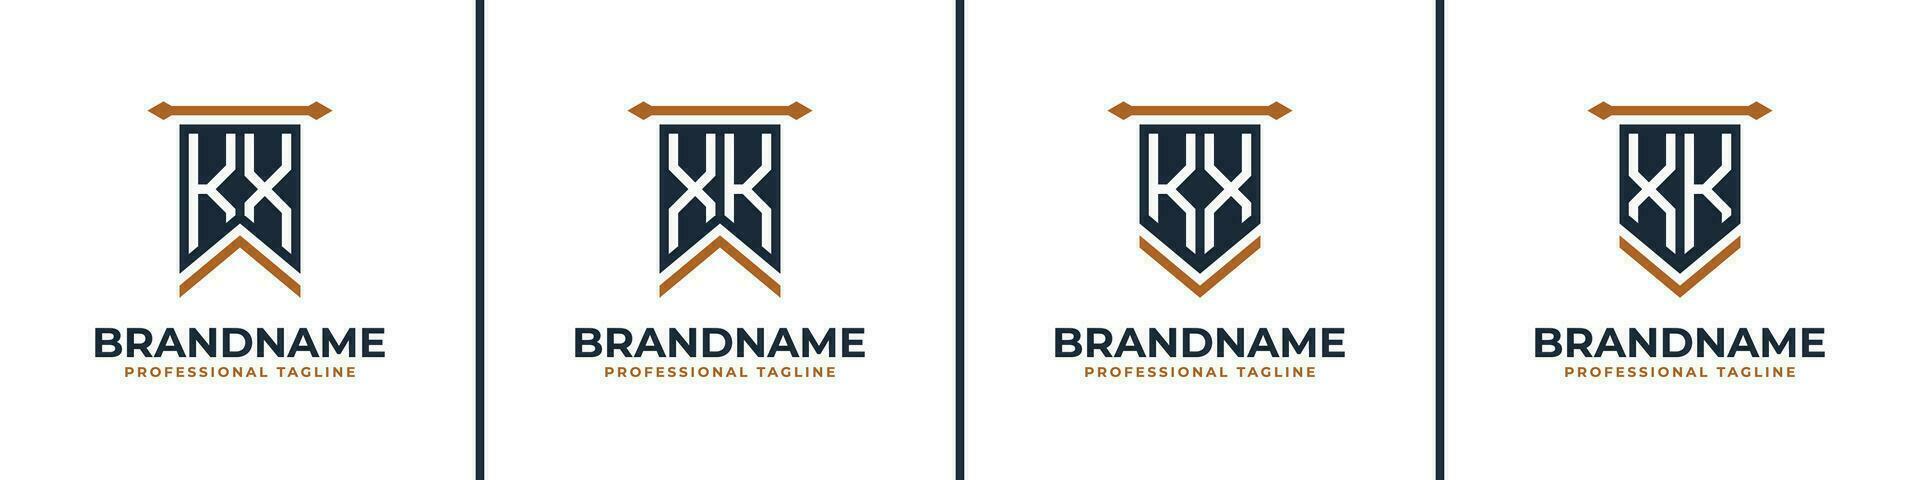 Letter KX and XK Pennant Flag Logo Set, Represent Victory. Suitable for any business with KX or XK initials. vector